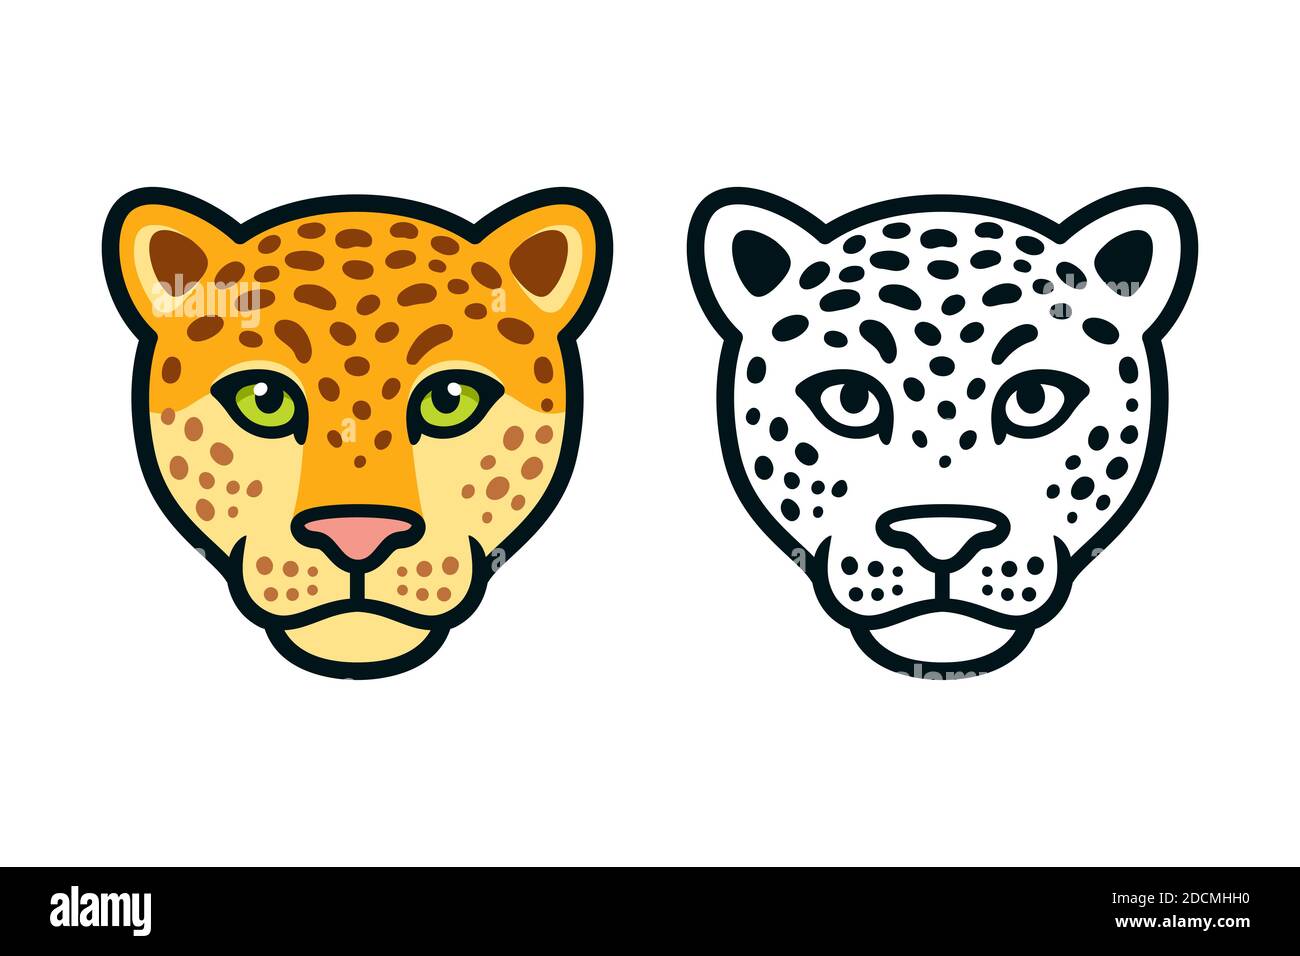 Cartoon jaguar or leopard head, color and black and white. Wild big cat face symbol, mascot or logo design. Isolated vector illustration. Stock Vector